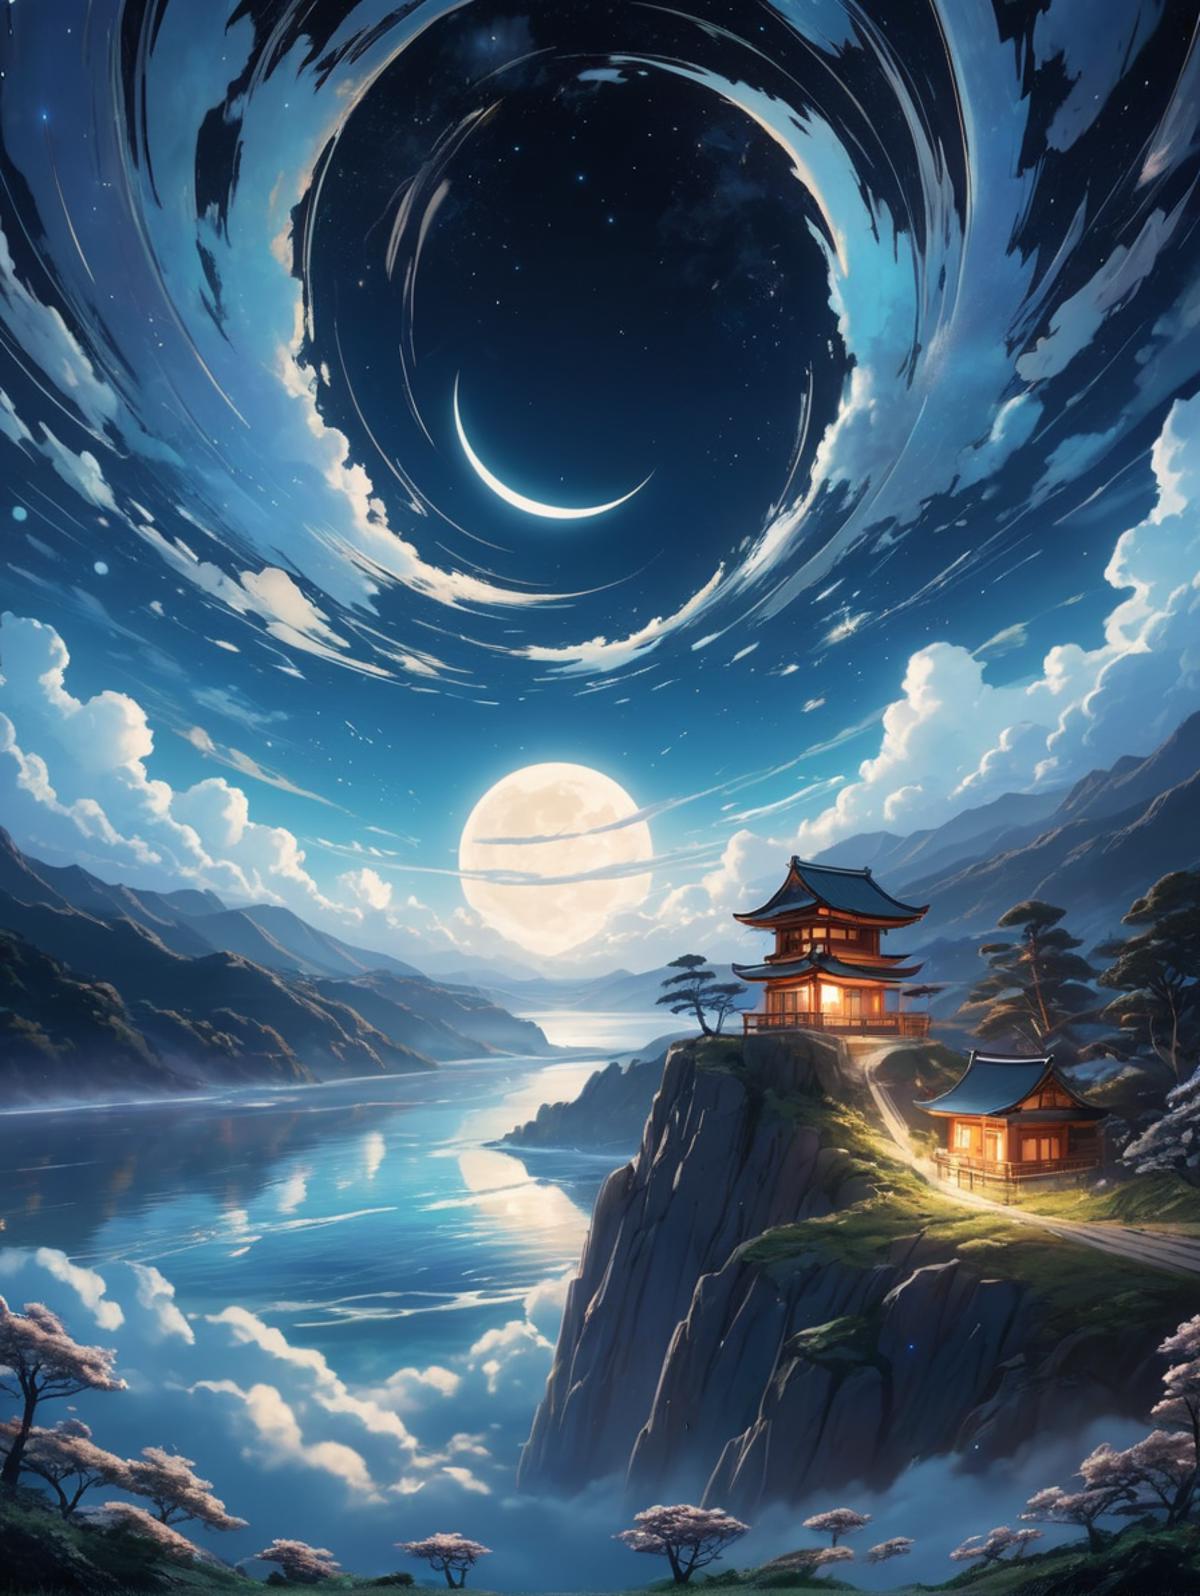 A painting of a serene mountain landscape with a large moon, a small house, and a Chinese-style pagoda.